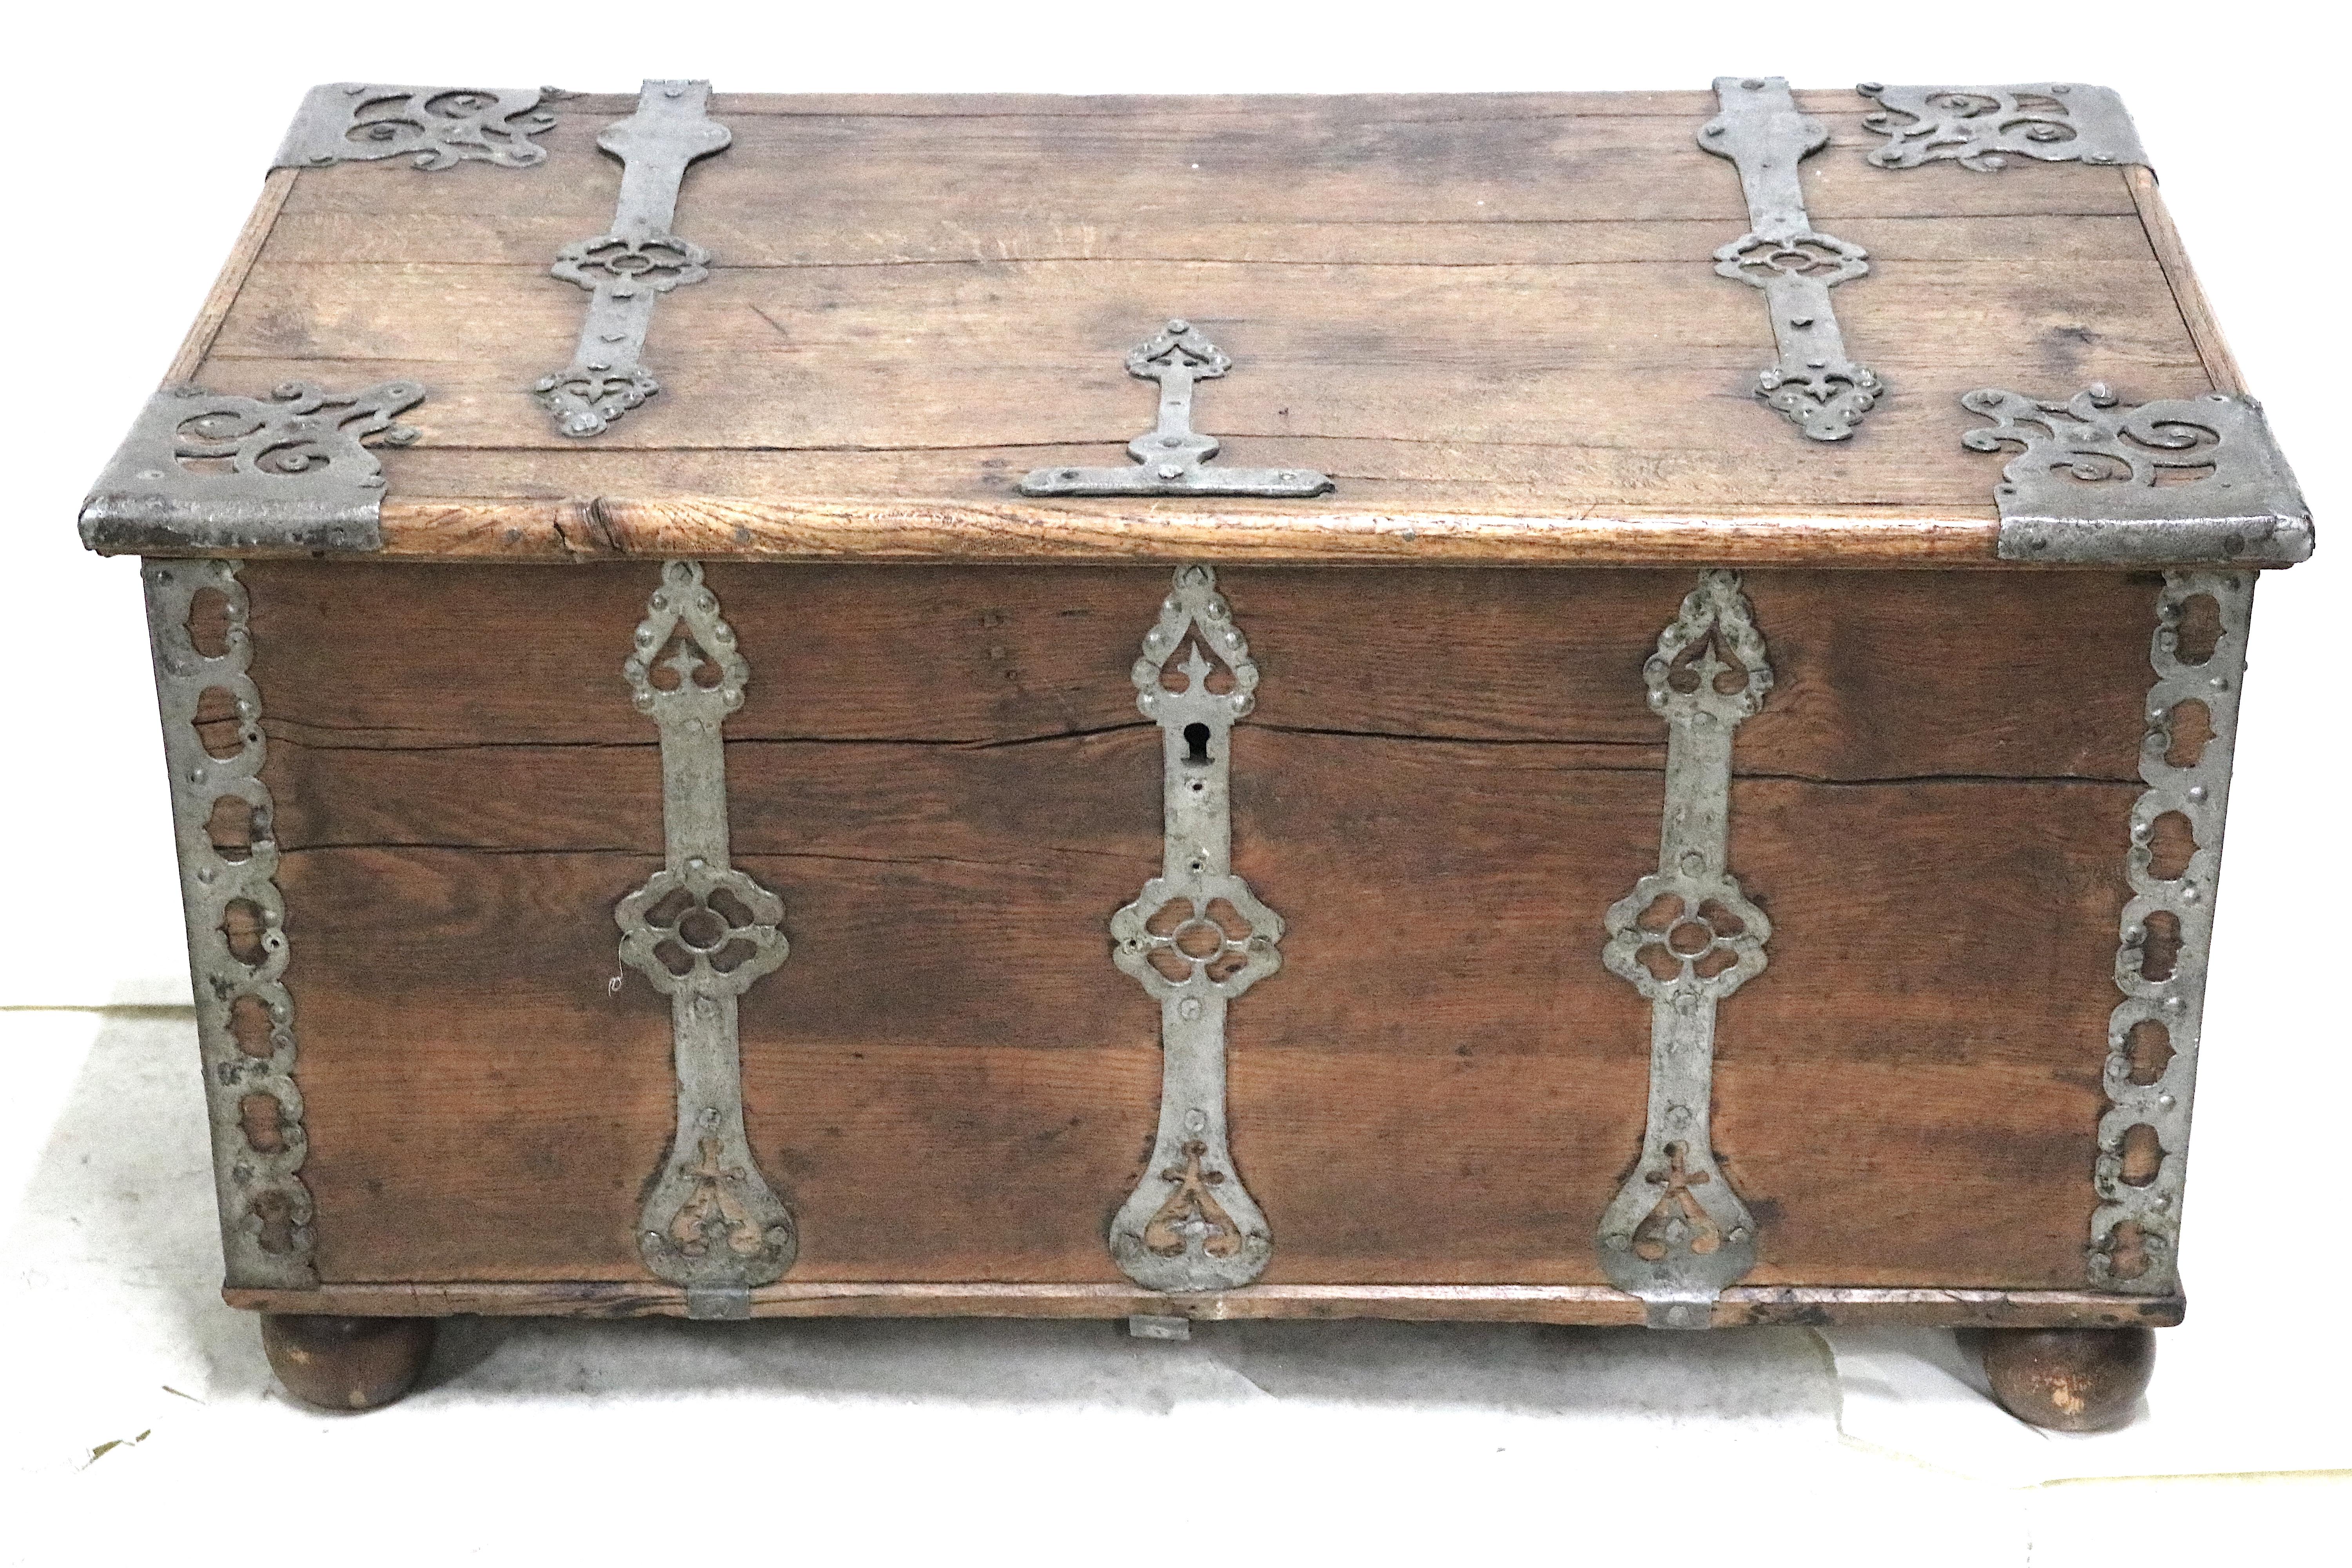 Irresistible circa 1730 Scandinavian early travel treasure chest with heavy carrying handles. The oak plank chest features natural iron strapping with inspired swedish designs and pierced decoration of the 18th century period.
The gorgeous